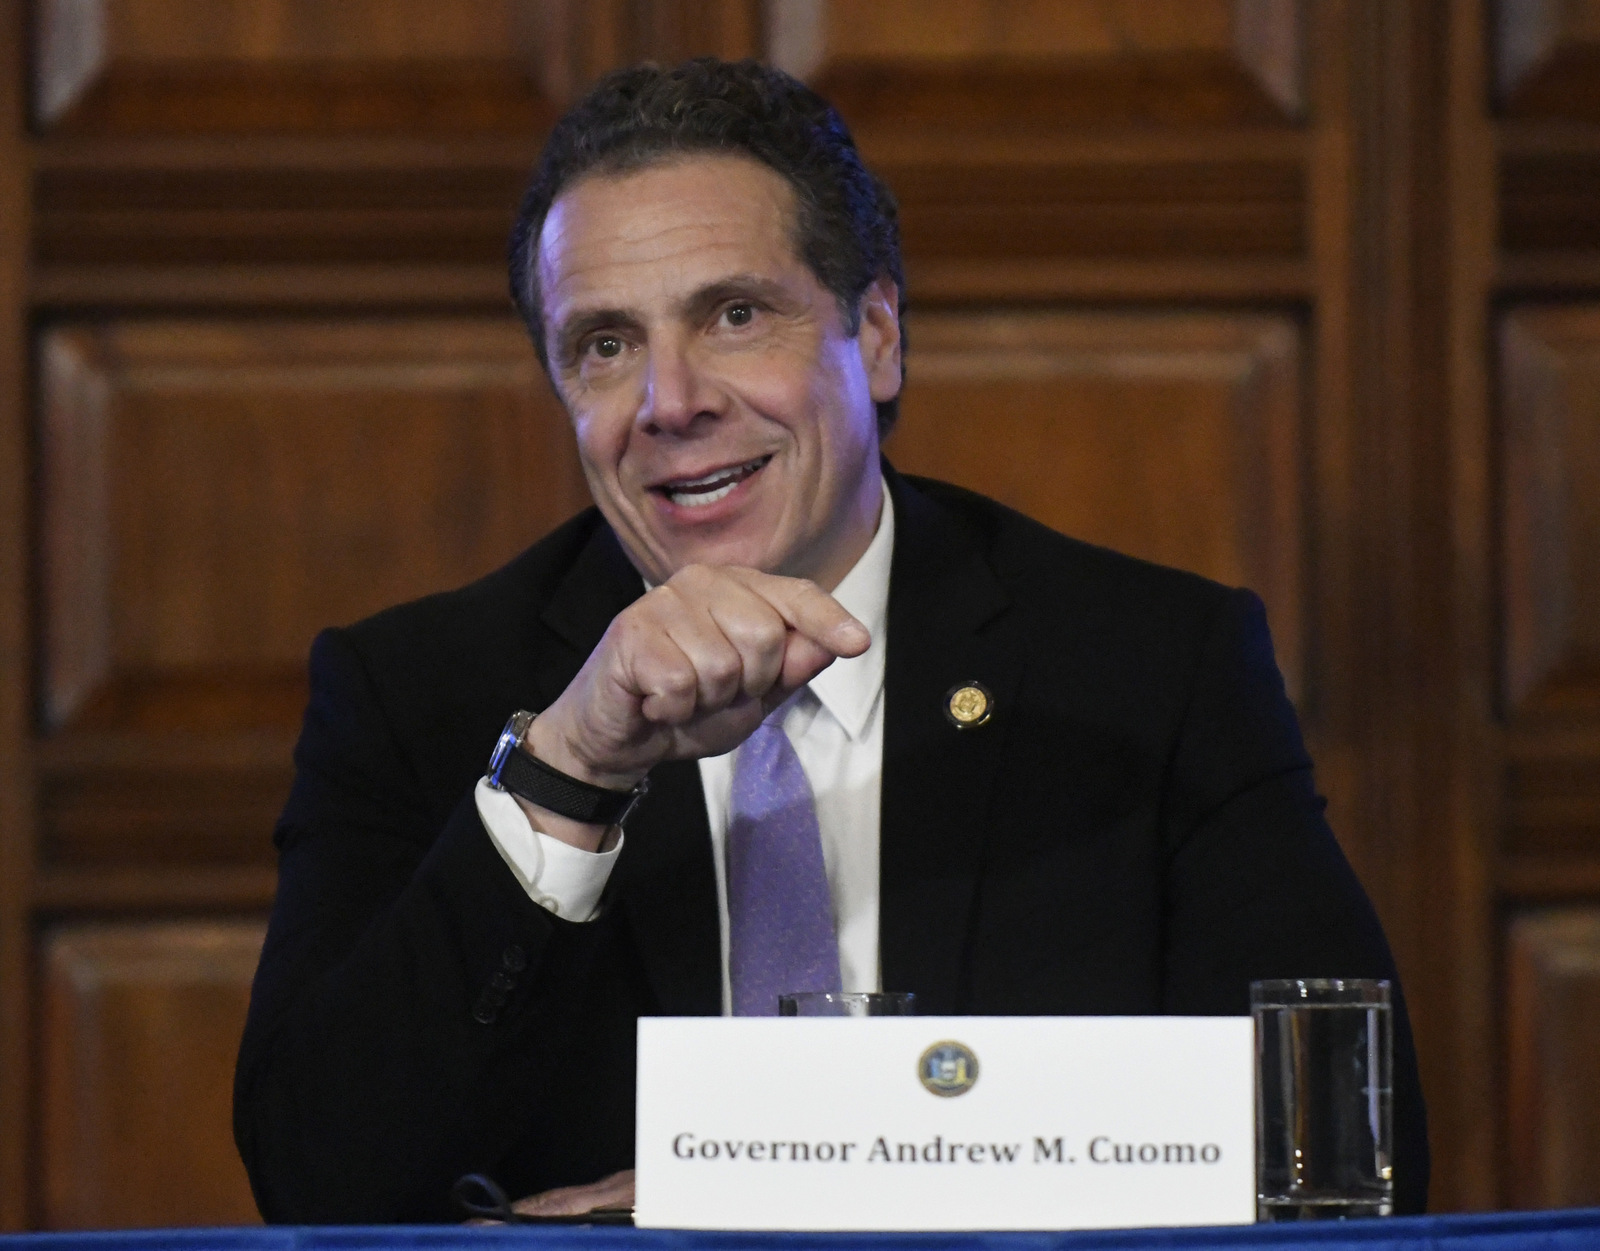 New York Gov. Andrew Cuomo speaks during a cabinet meeting in the Red Room at the Capitol in Albany, N.Y. (AP/Hans Pennink)